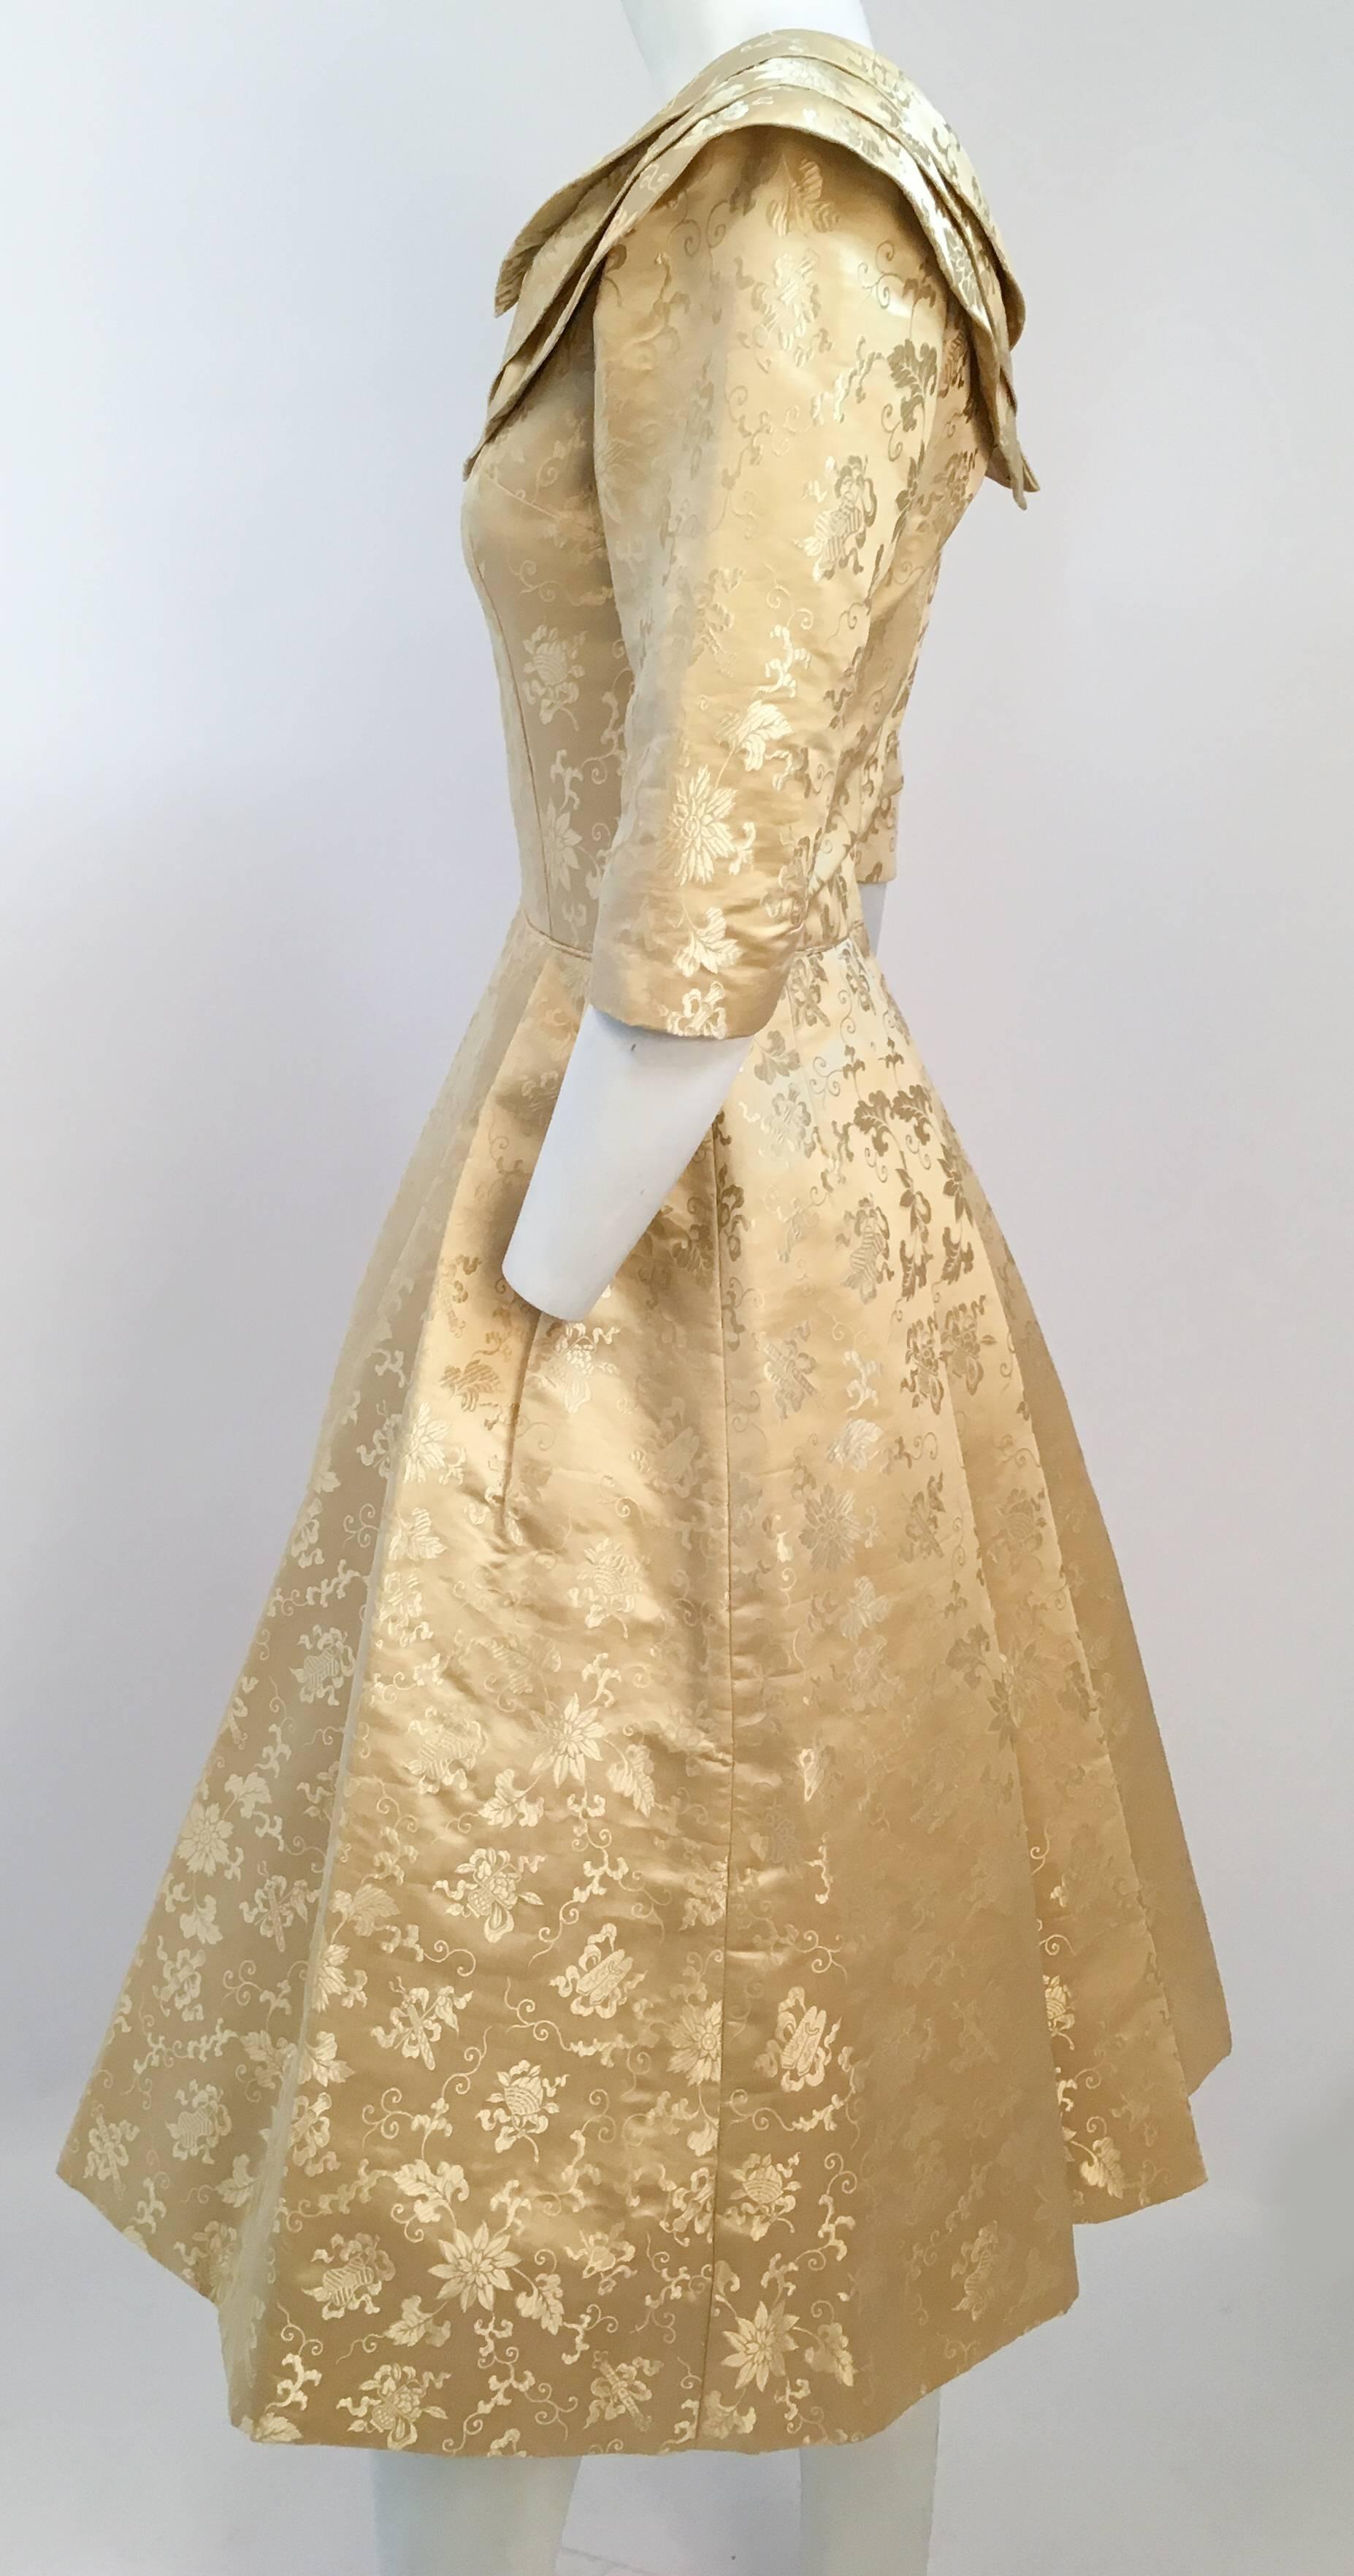 50s Gold Jacquard Cocktail Dress. Pleated skirt is with stiffened lining helps keep structure. Three quarter sleeves. Elegant boat neck collar. Back zips up center with metal zipper and hook and eye closures. 

Size 2, or Small